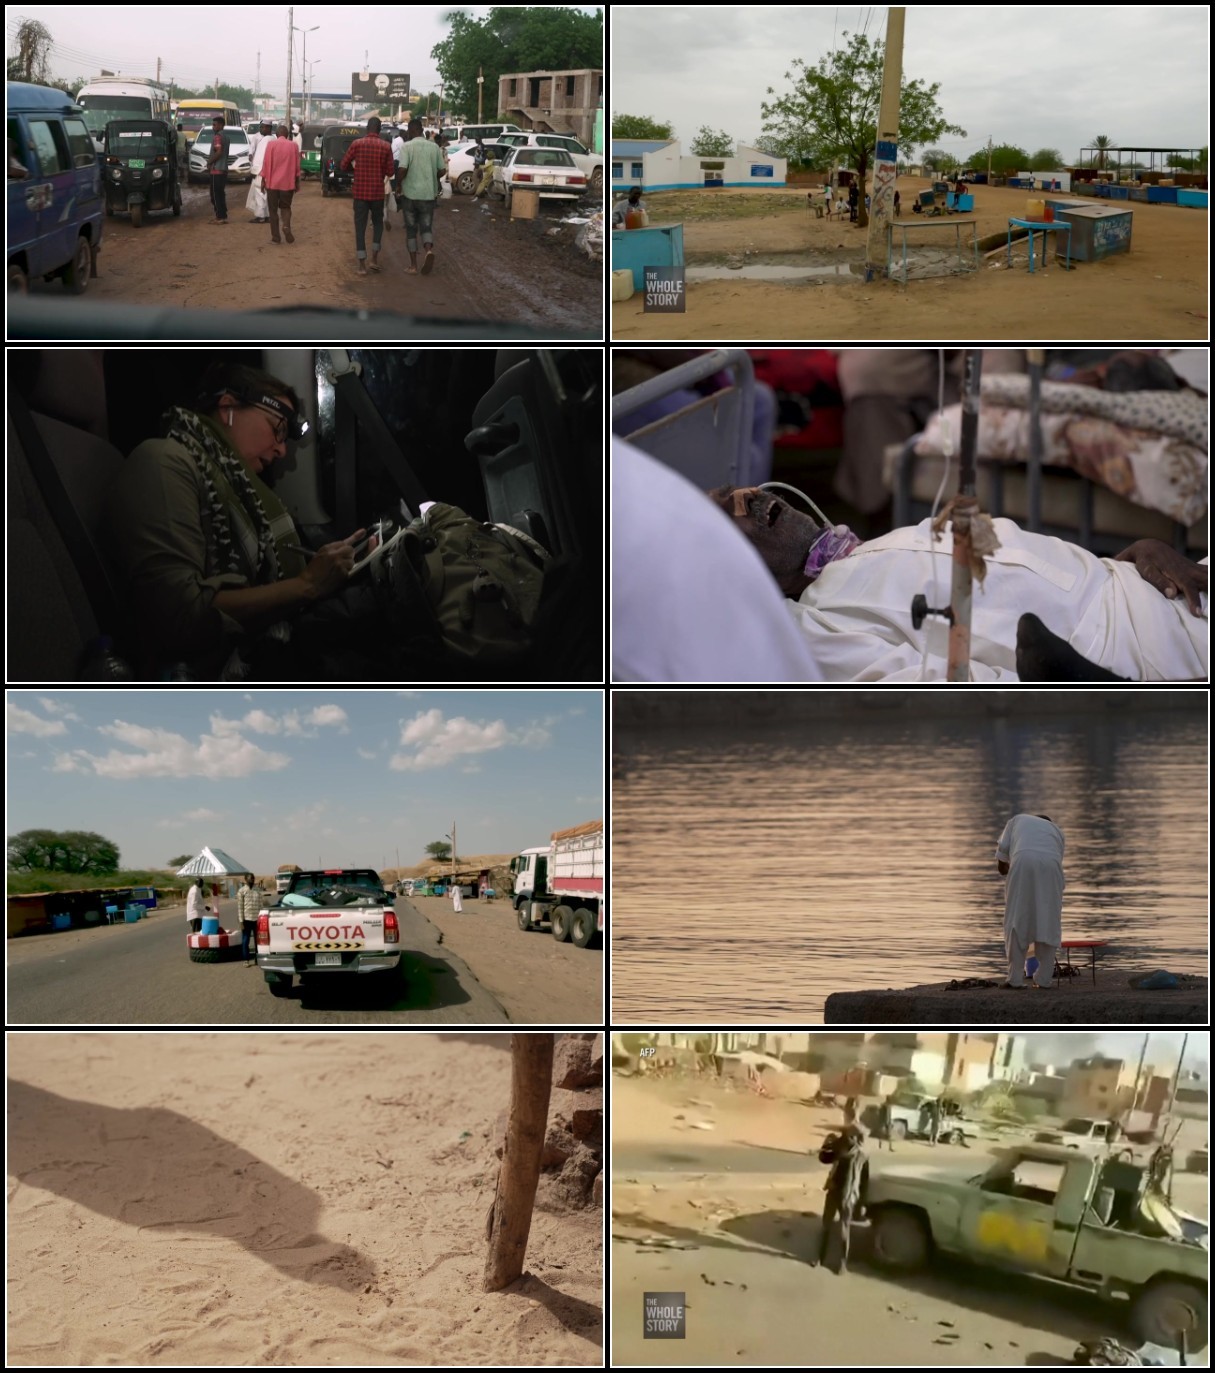 The Whole Story With Anderson Cooper S01E21 Going Home The War in Sudan 720p MAX W...